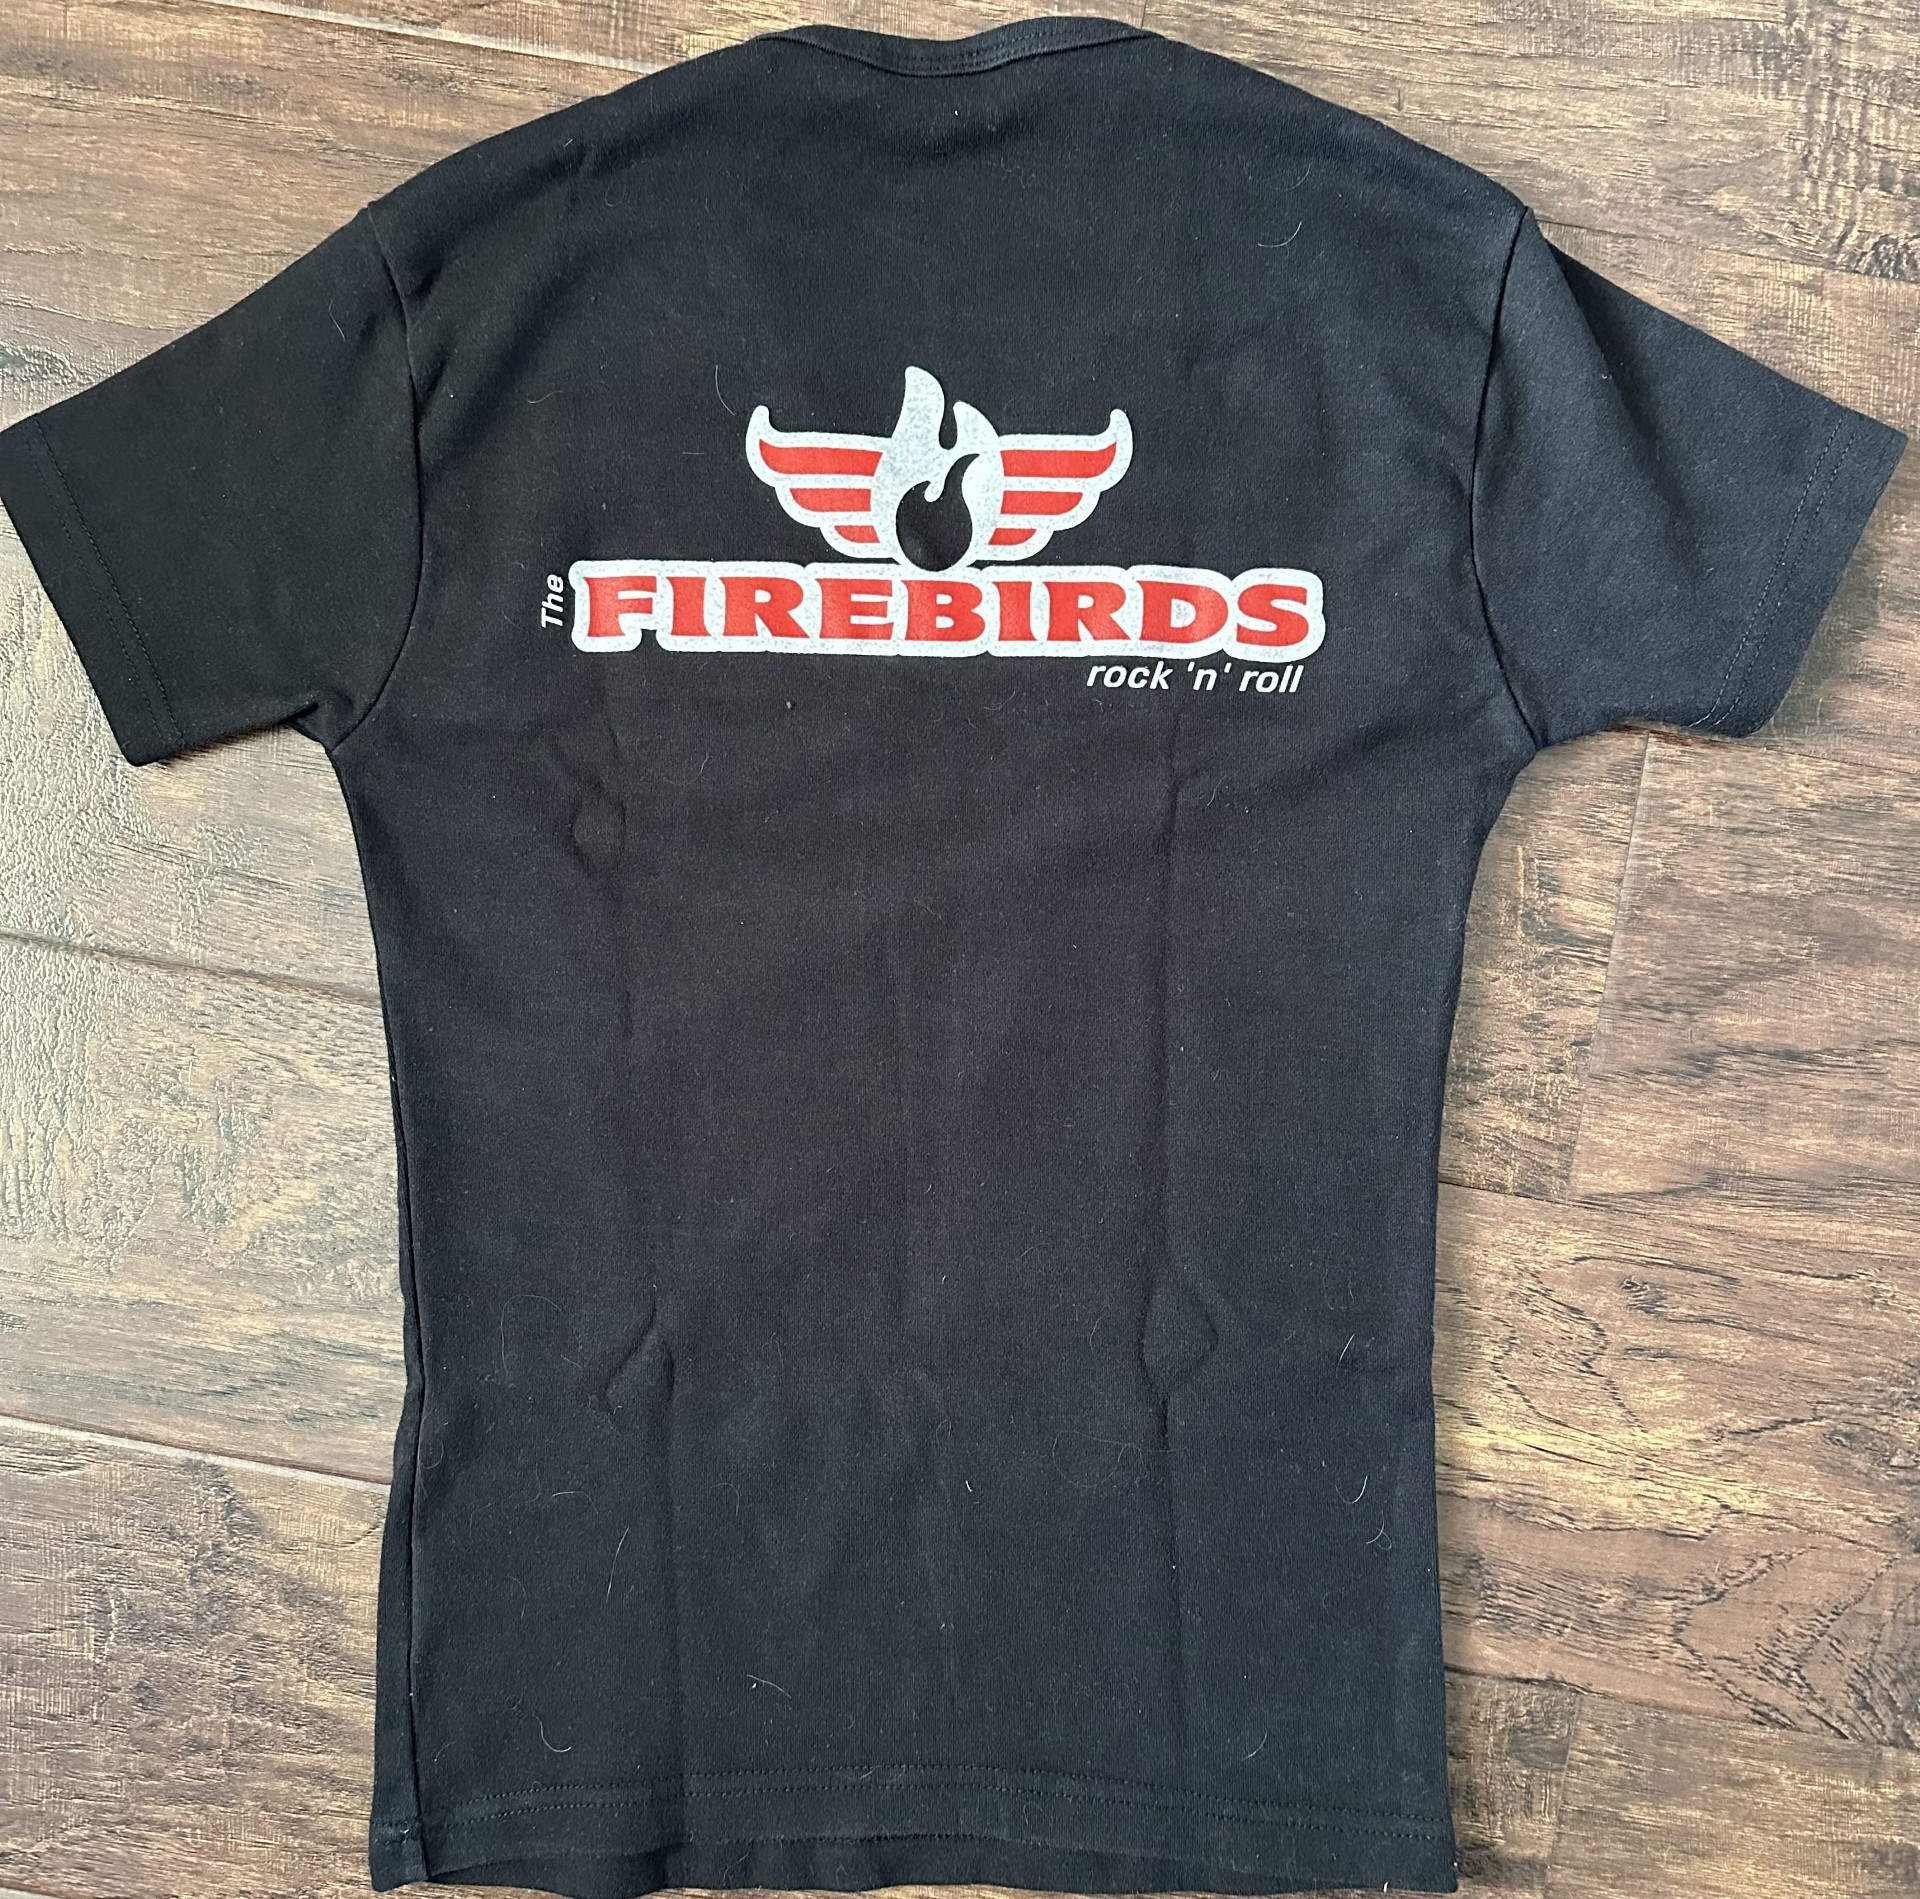 The Firebirds Ladies Black V-Neck (Limited Edition)